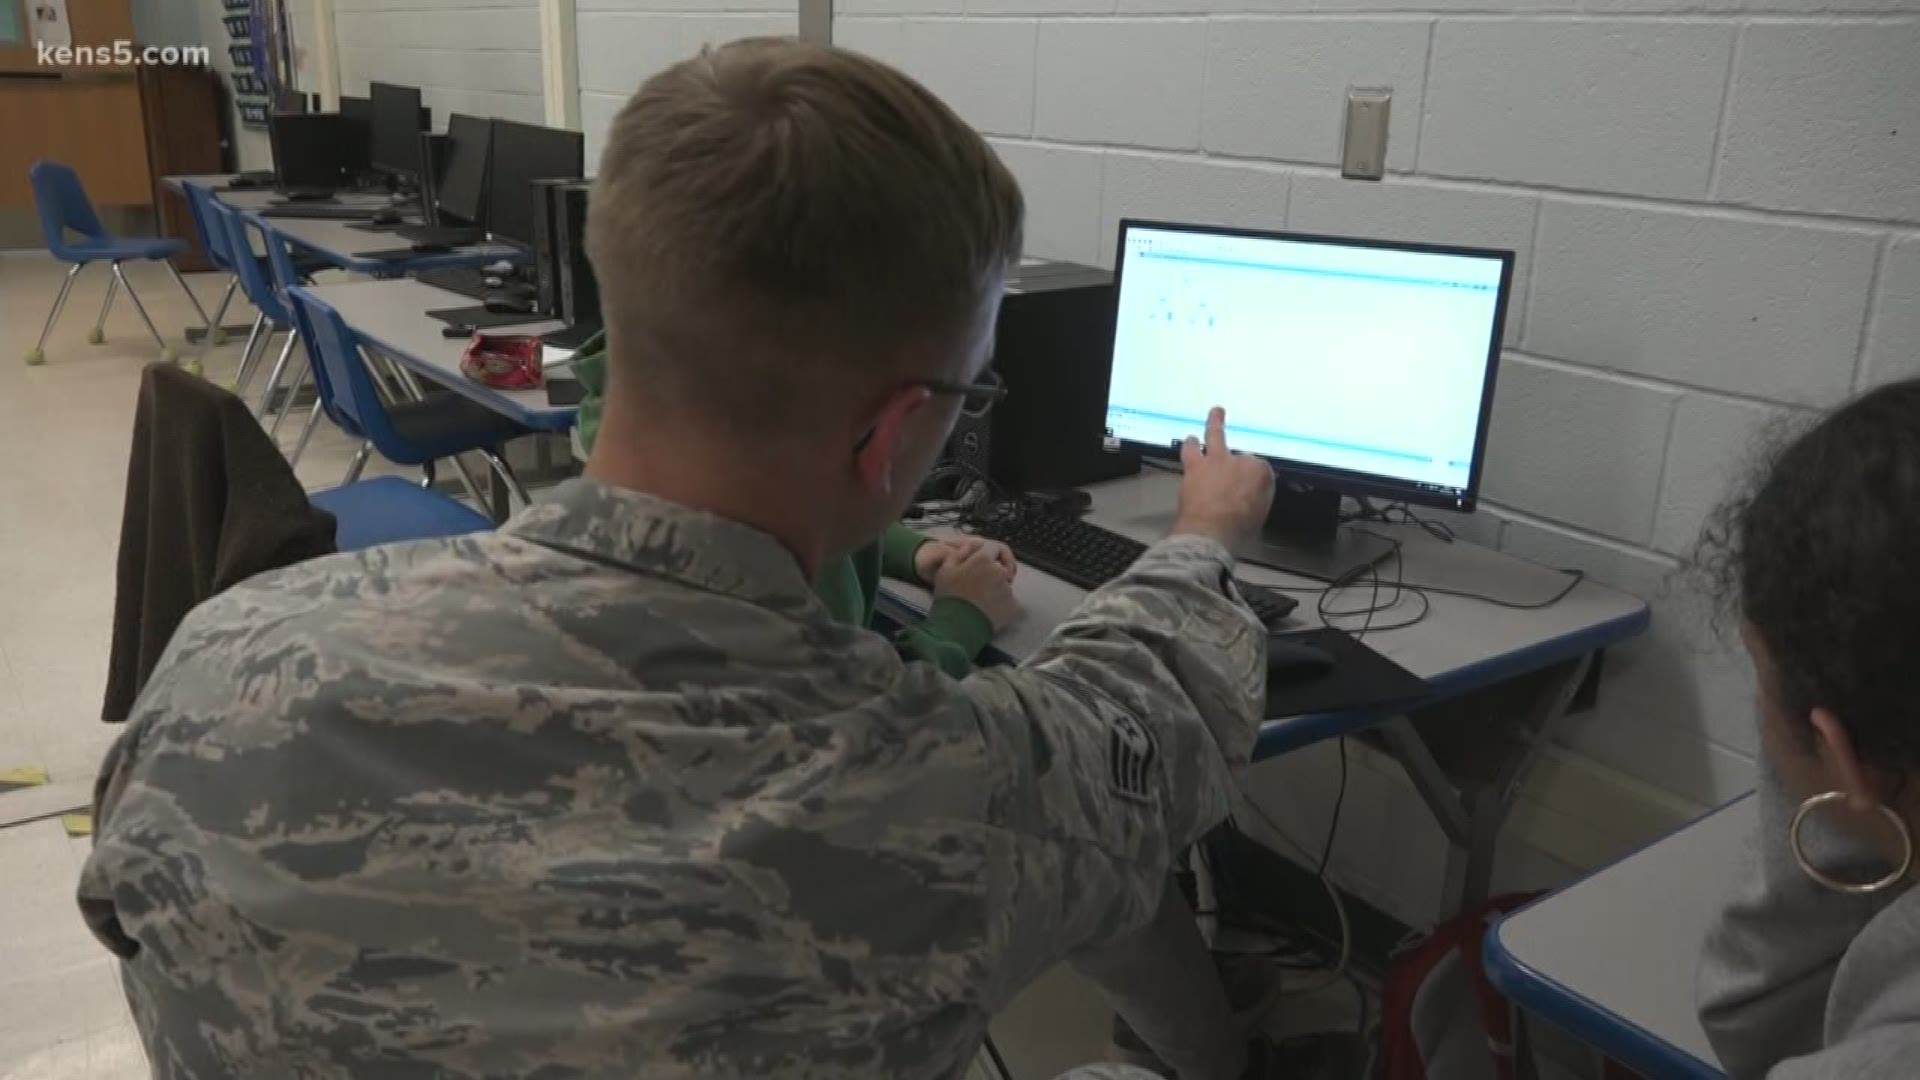 San Antonio is the nation's largest cyber security hub outside of Washington, D.C. A large concentration of cyber experts are here in Military City USA, and as Eyewitness News reporter Sharon Ko shows us, the 24th Air Force is helping to create the next generation of top talent.